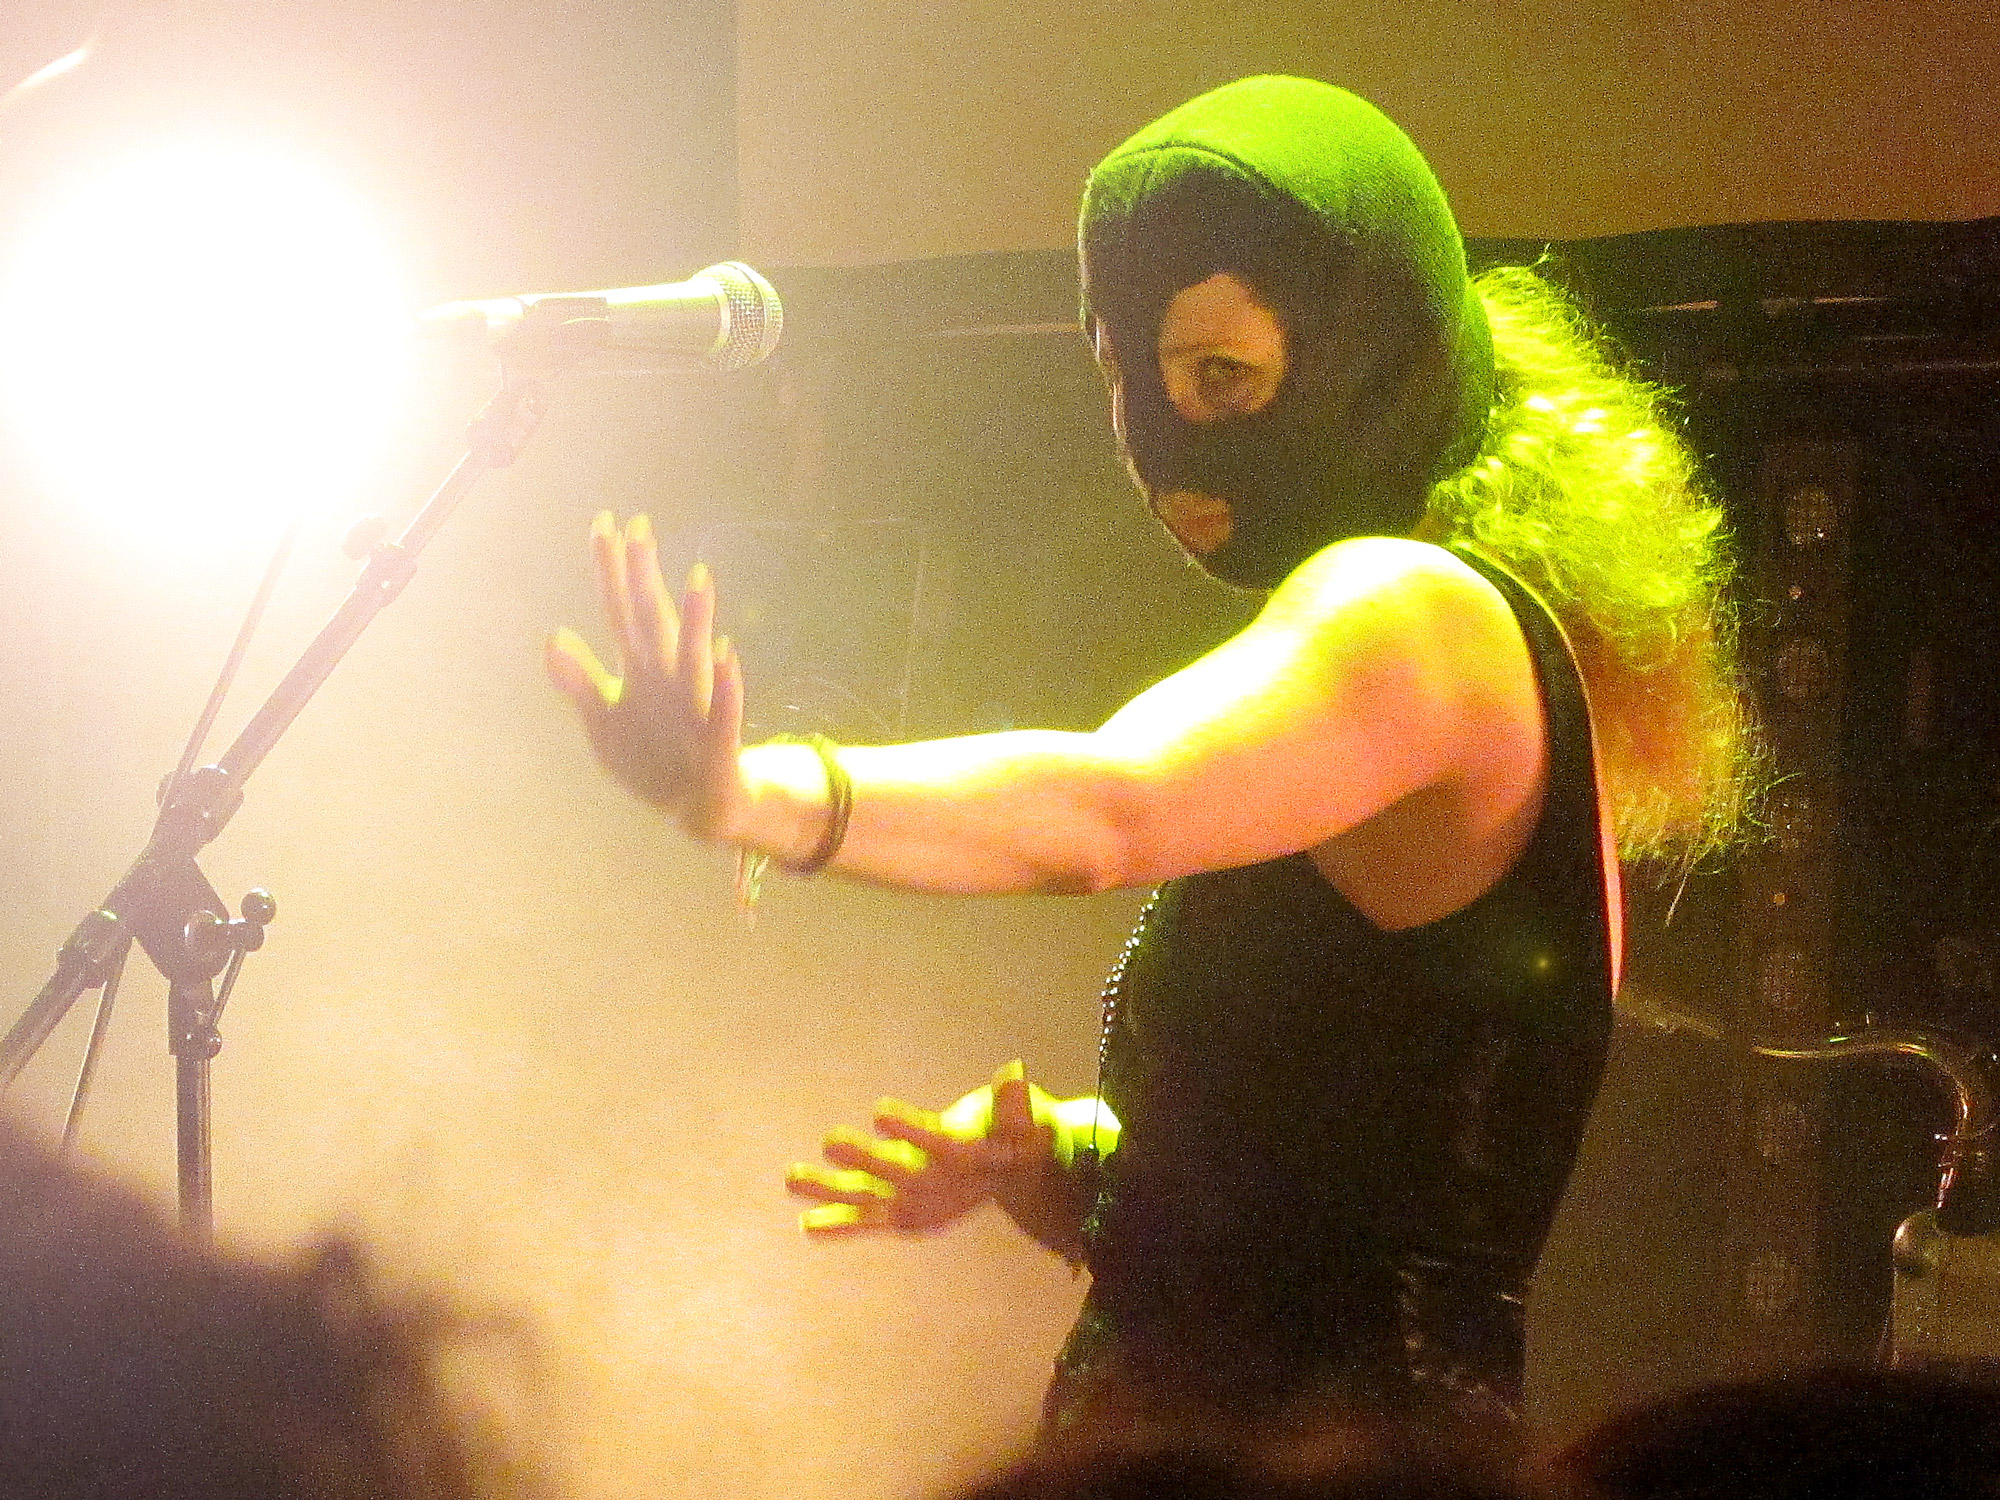 A woman dressed in a sleeveless top is dancing on a misty stage, She is wearing a green balaclava, her hair billowing out of the back.